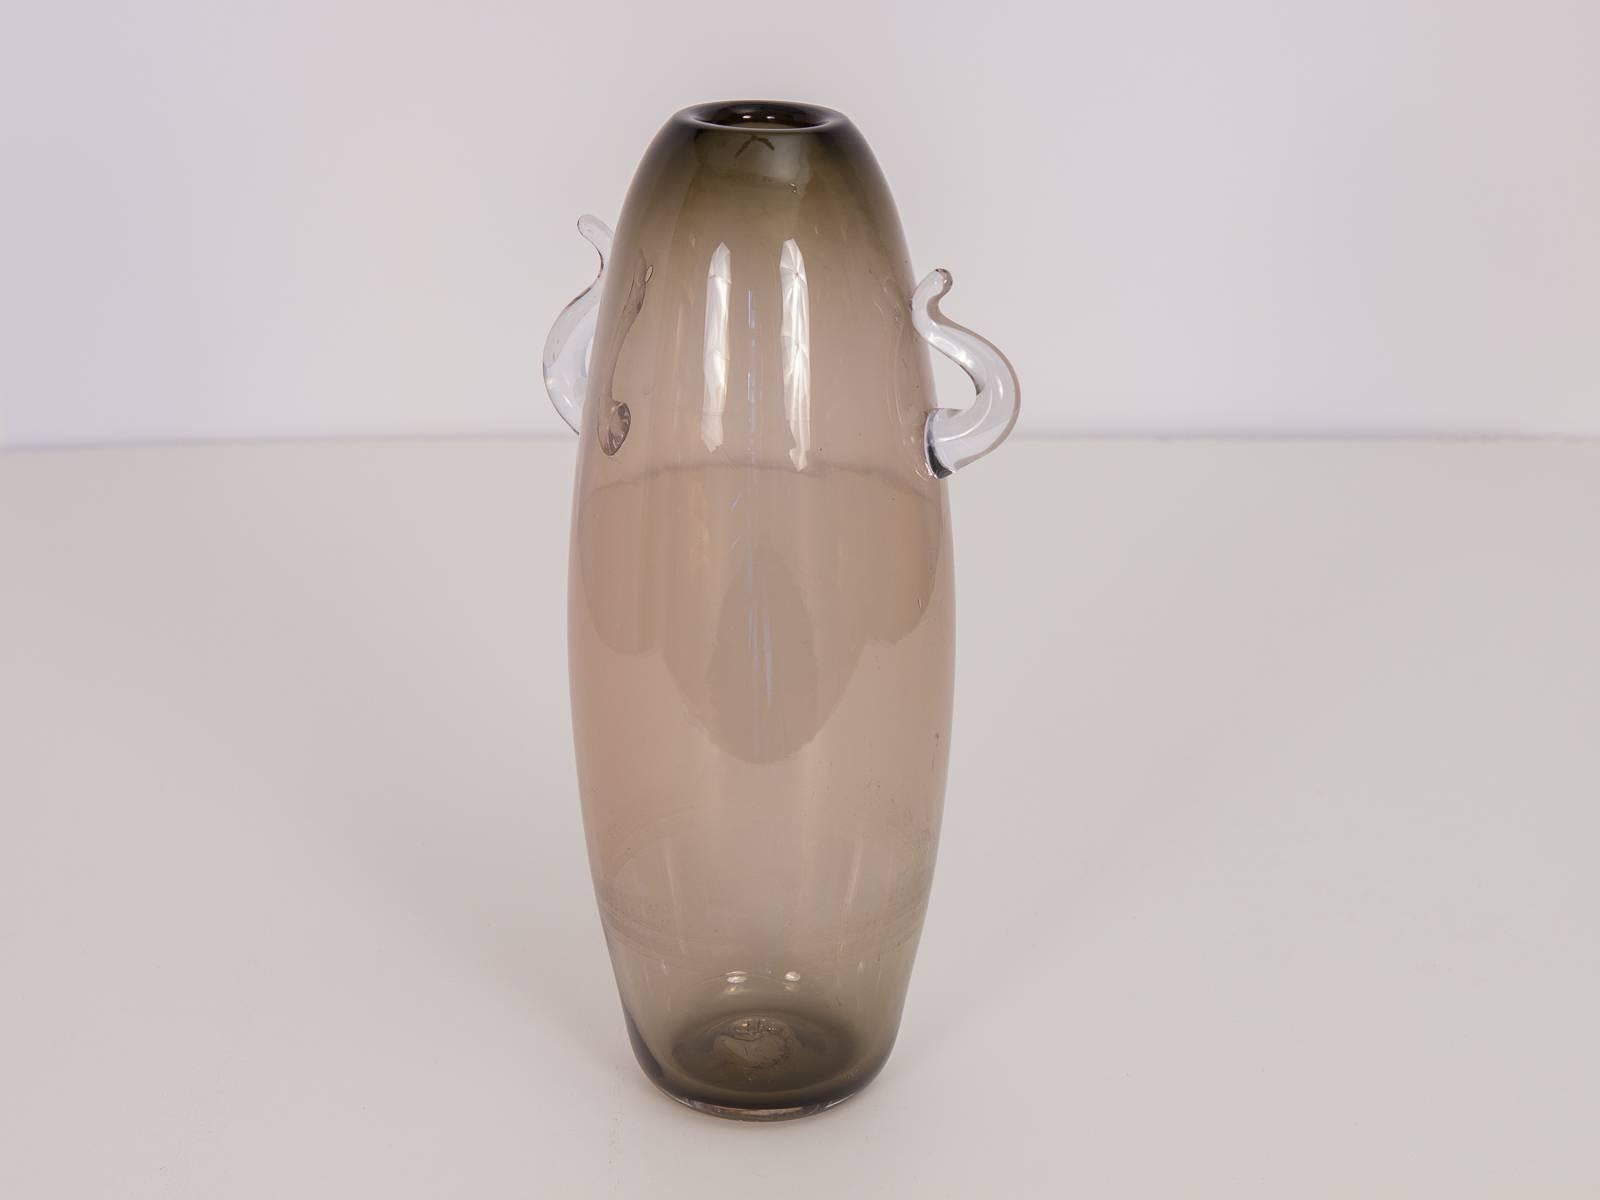 Handblown Scandinavian smoked glass vase with petite curved handles. The subtle gradation of color from the opening to the base emphasize the simple profile of this elegant vase. In excellent condition, with virtually no visible wear.